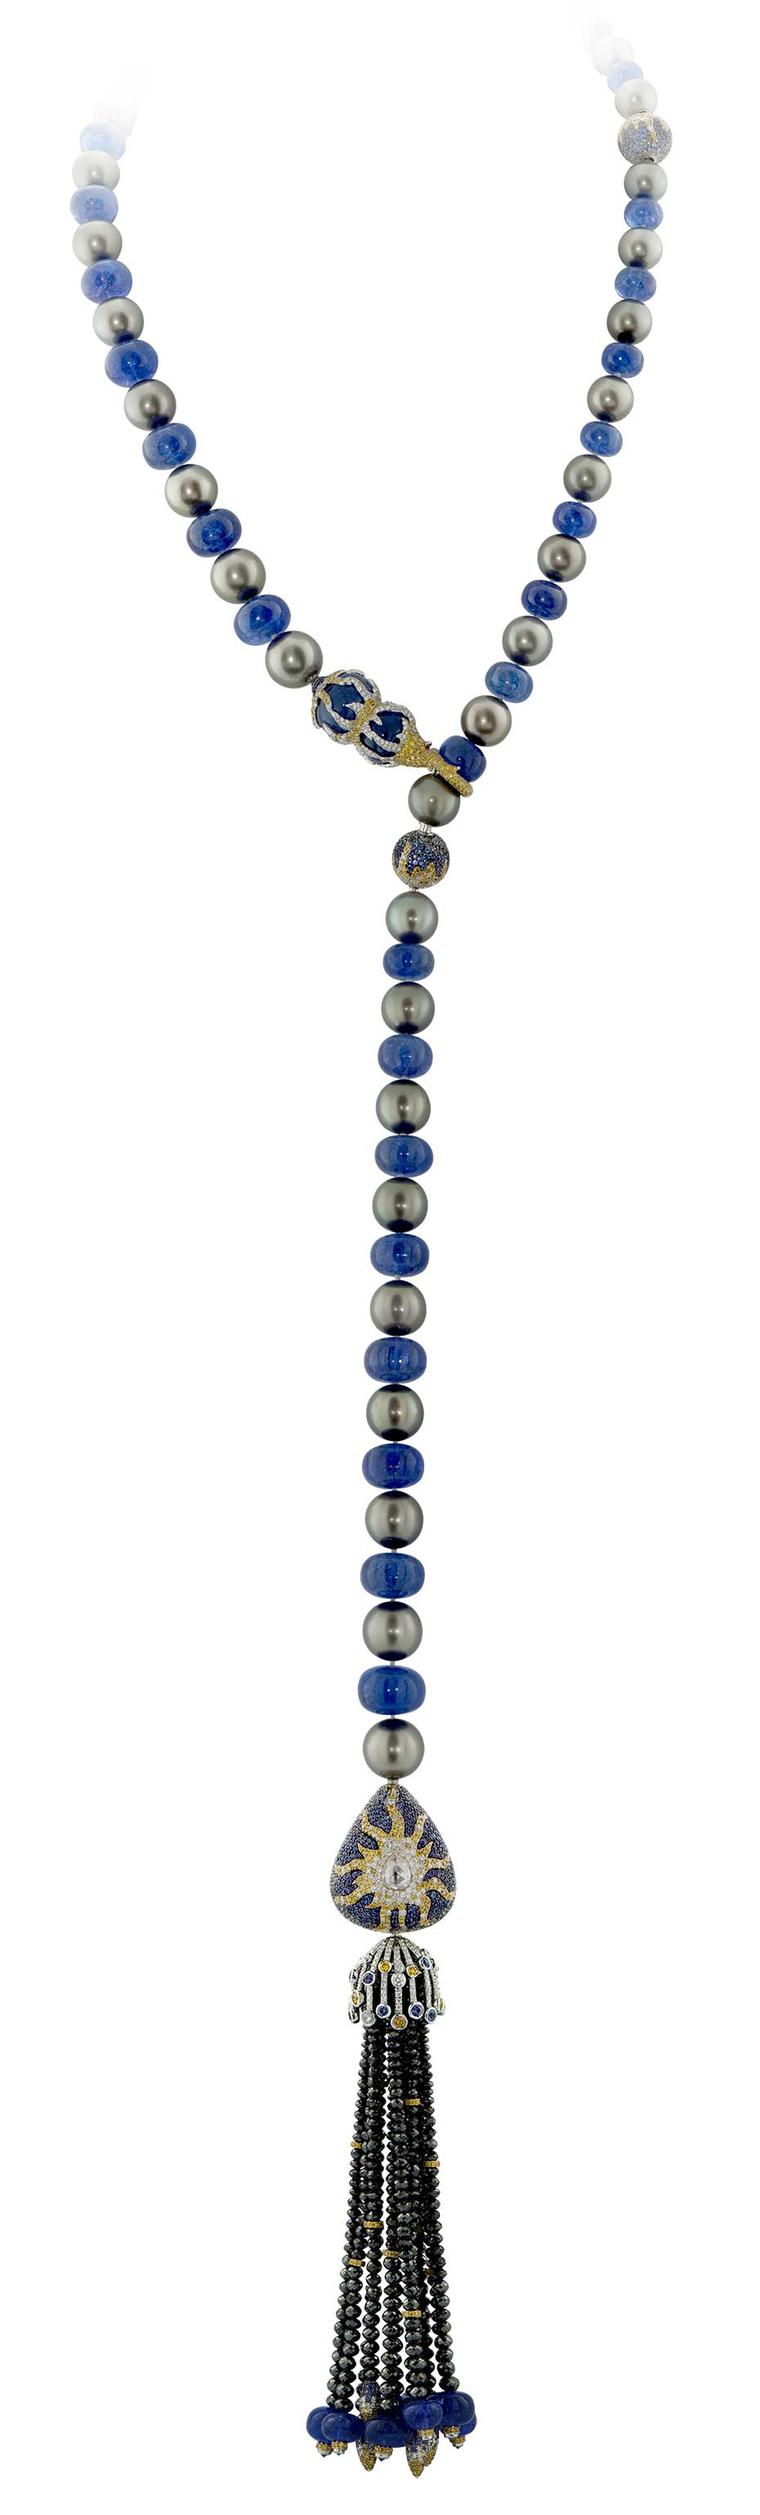 Another look for Alessio Boschi's Stardust lariat necklace, with Tahitian pearls, tanzanite beads, diamonds and sapphires.